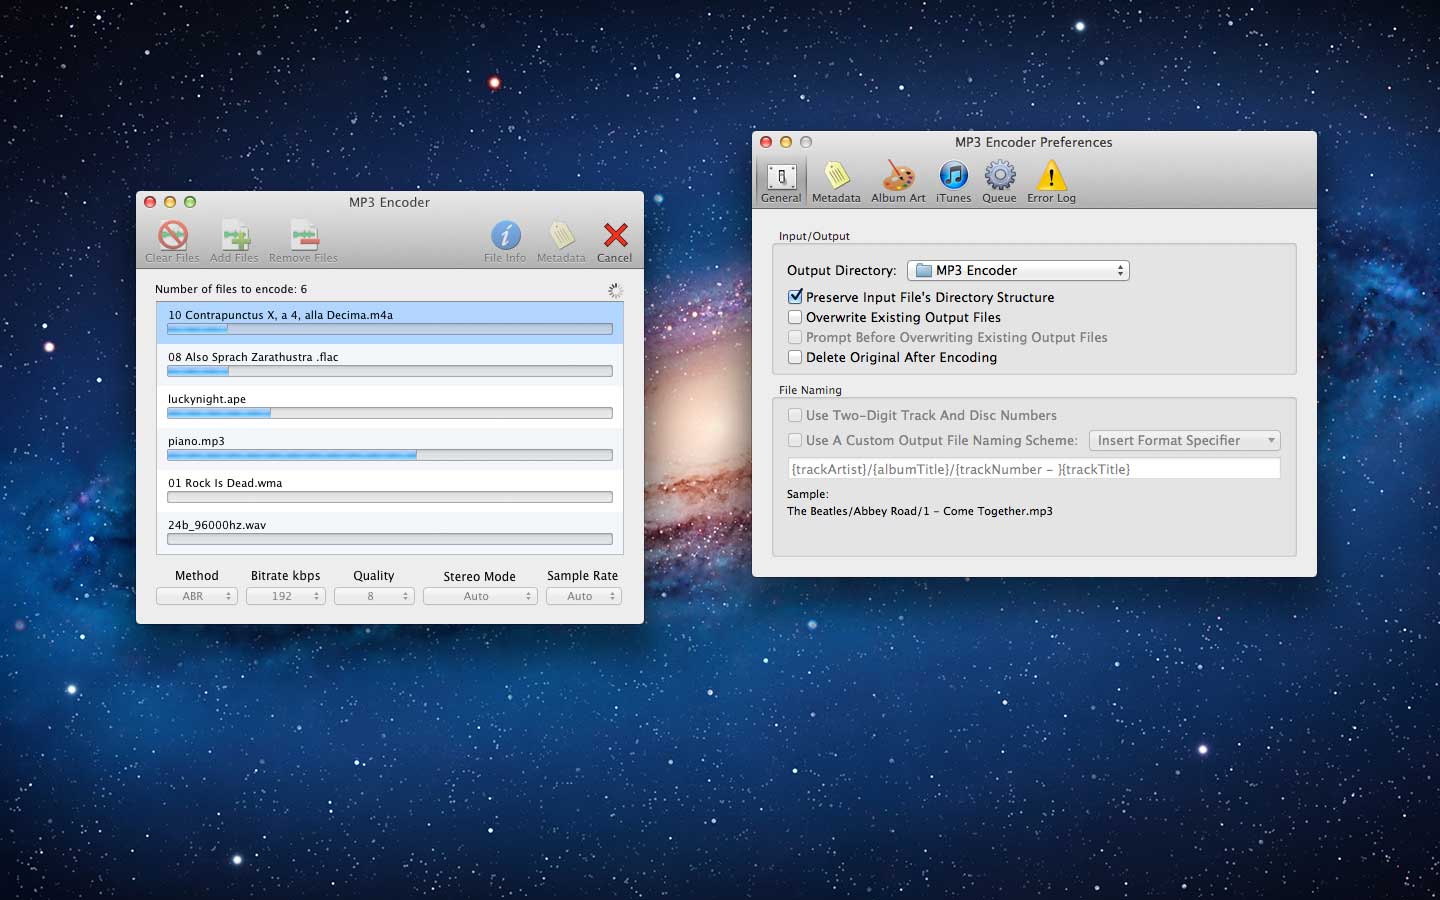 Bittorrent For Mac Os X 10.6 8